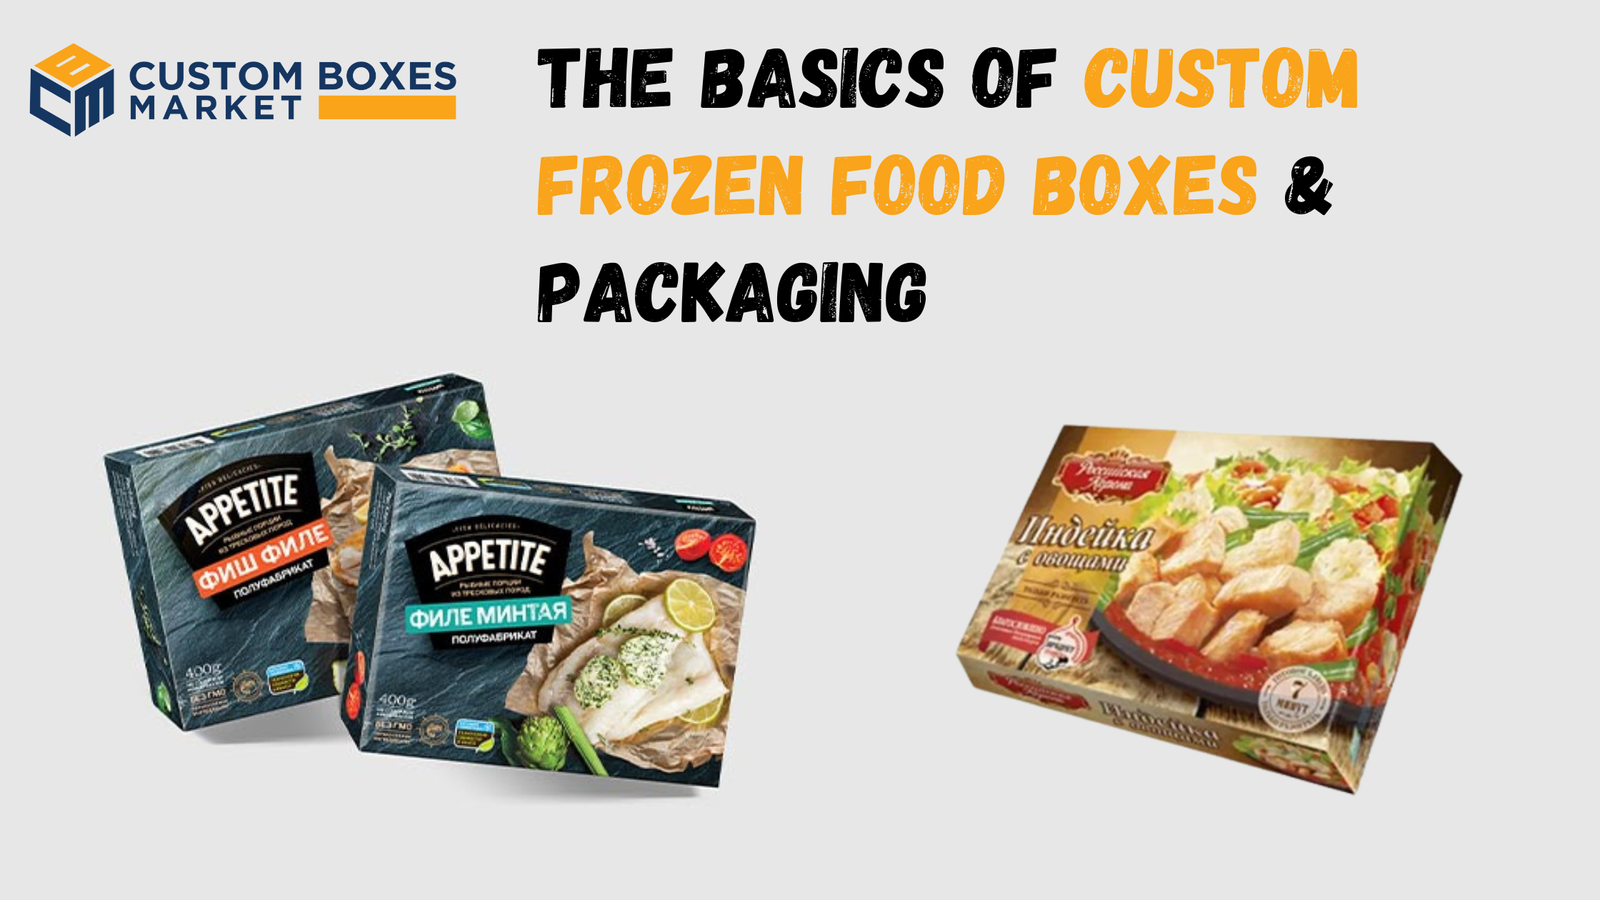 The Basics of Custom Frozen Food Boxes & Packaging